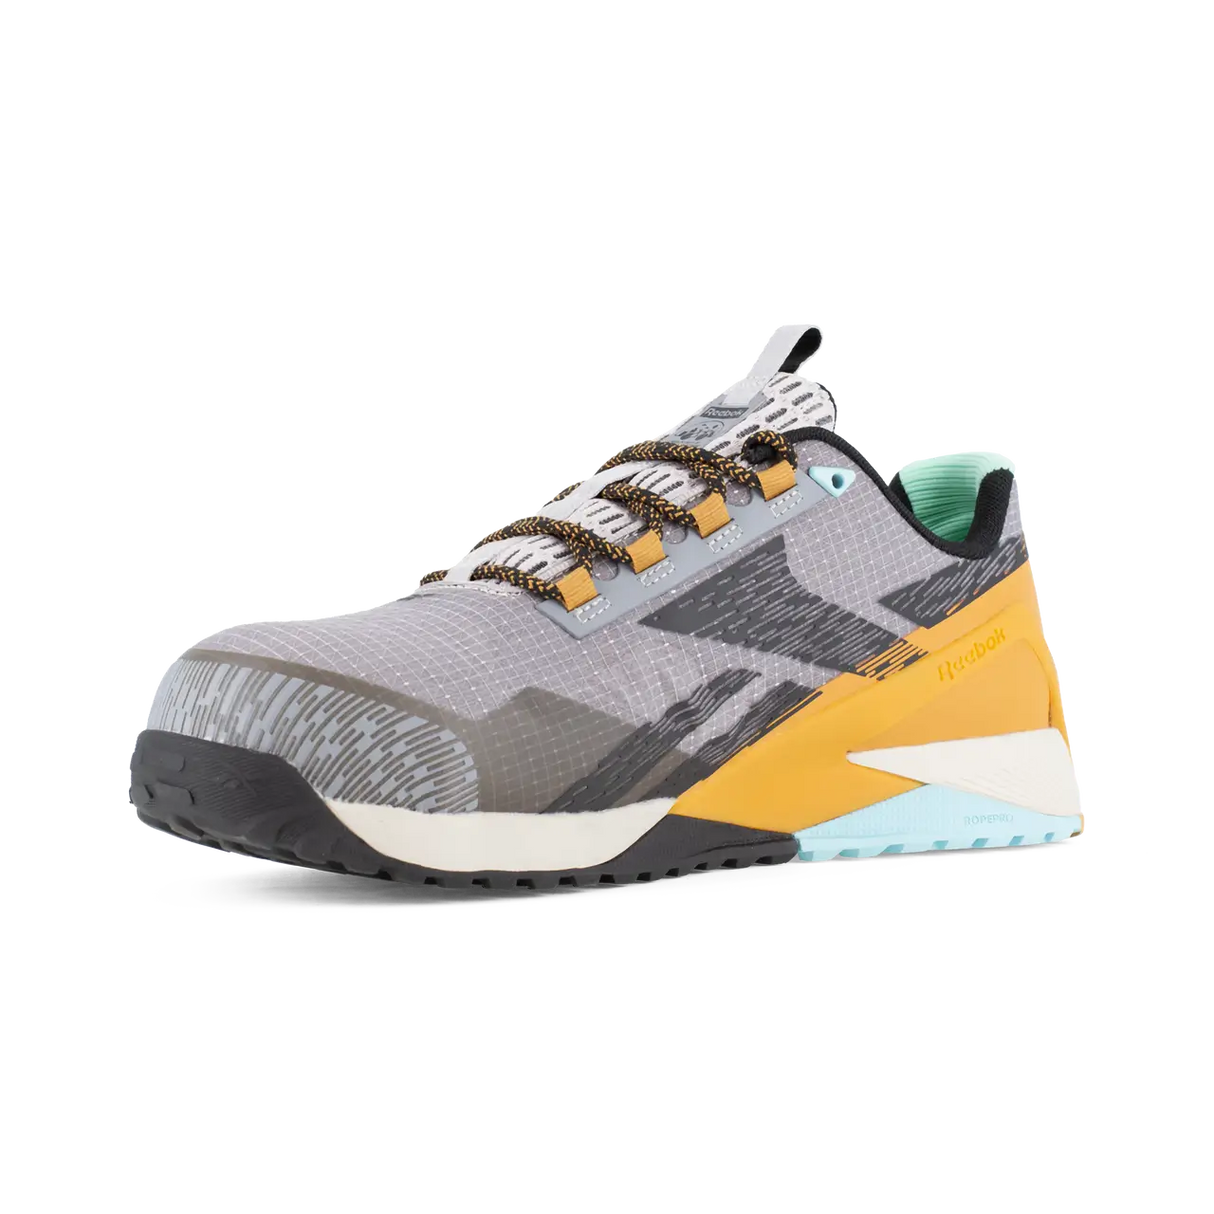 Reebok Nano X1 Adventure Work Athletic Composite Toe Silver, Grey, Clay, and Black RB348 inside view